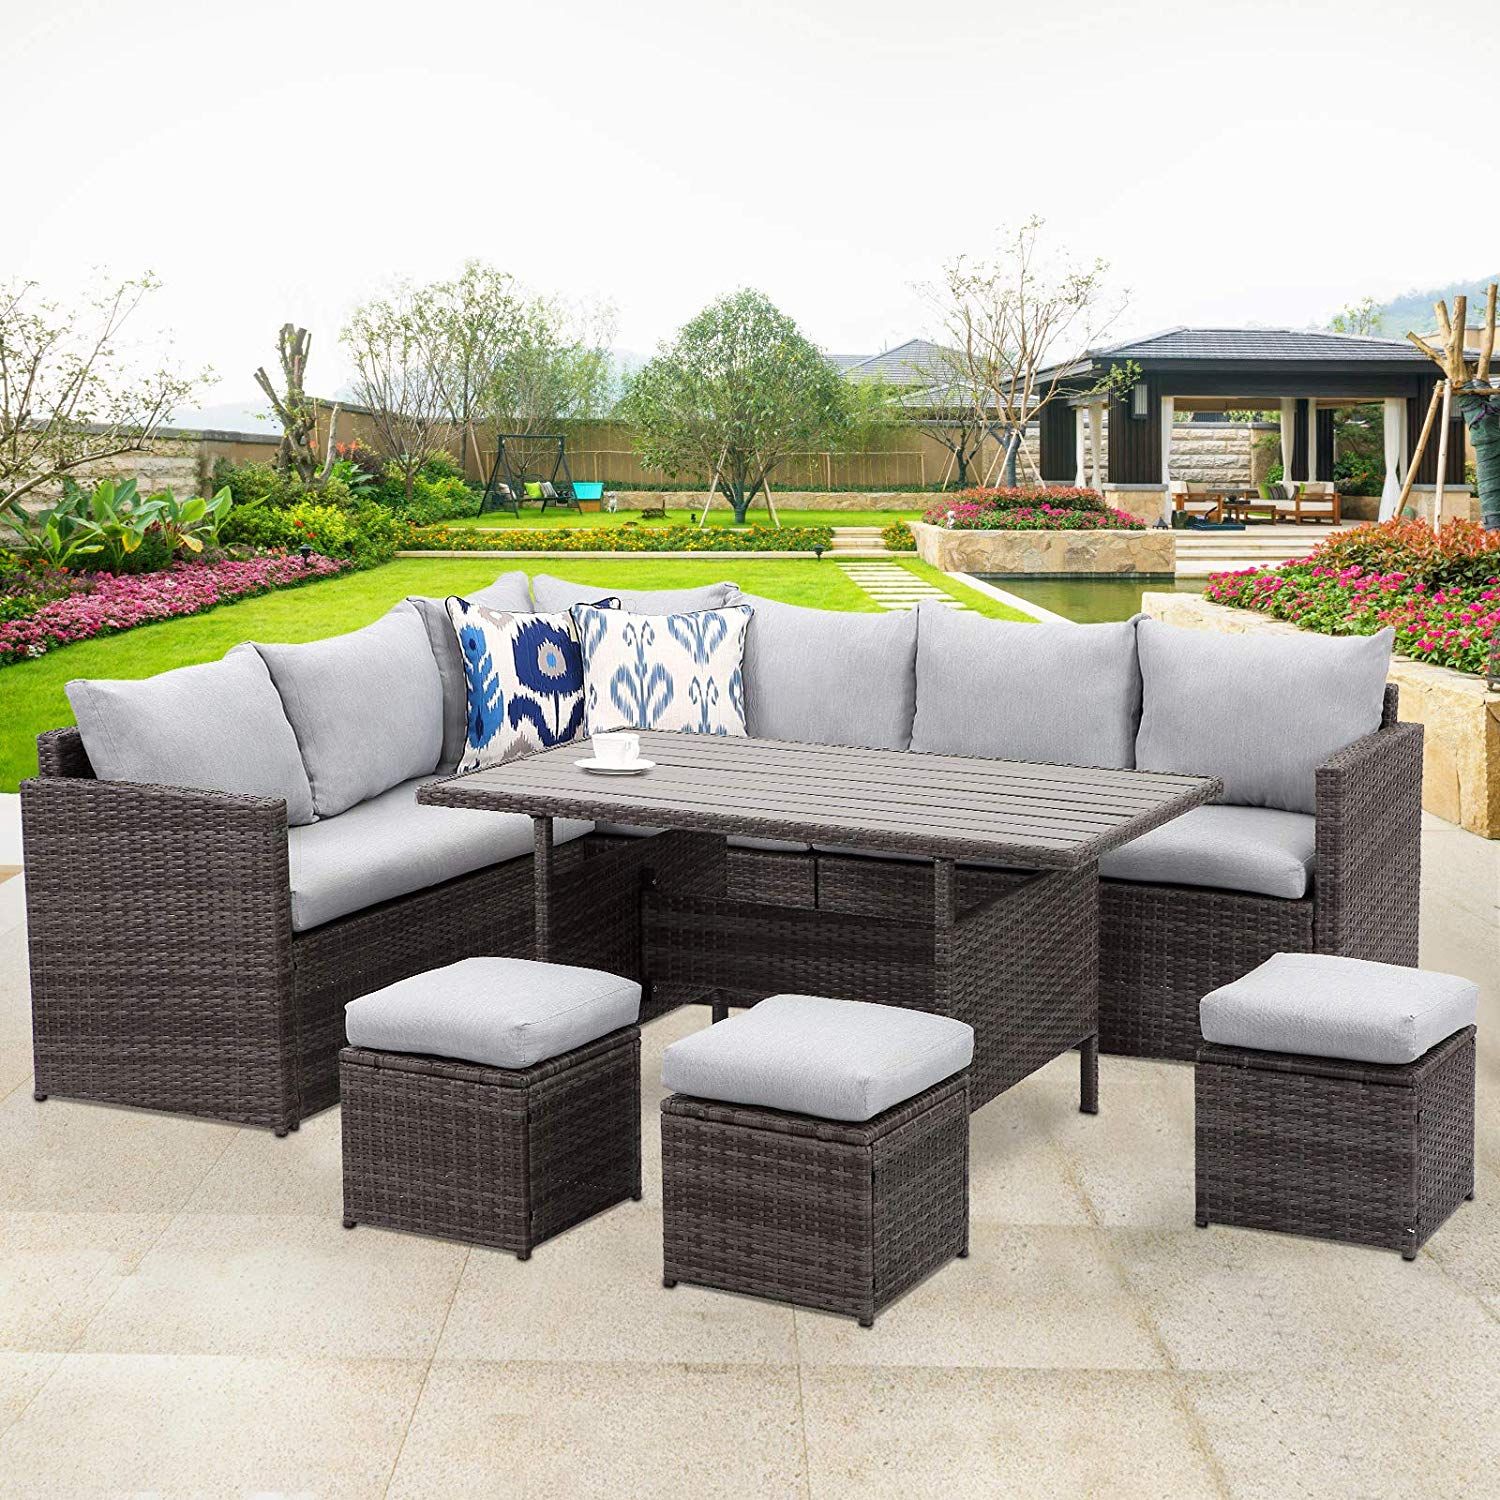 7 Piece Outdoor Conversation Set All Weather Wicker Sectional Sofa Inside Outdoor Seating Sectional Patio Sets (View 4 of 15)